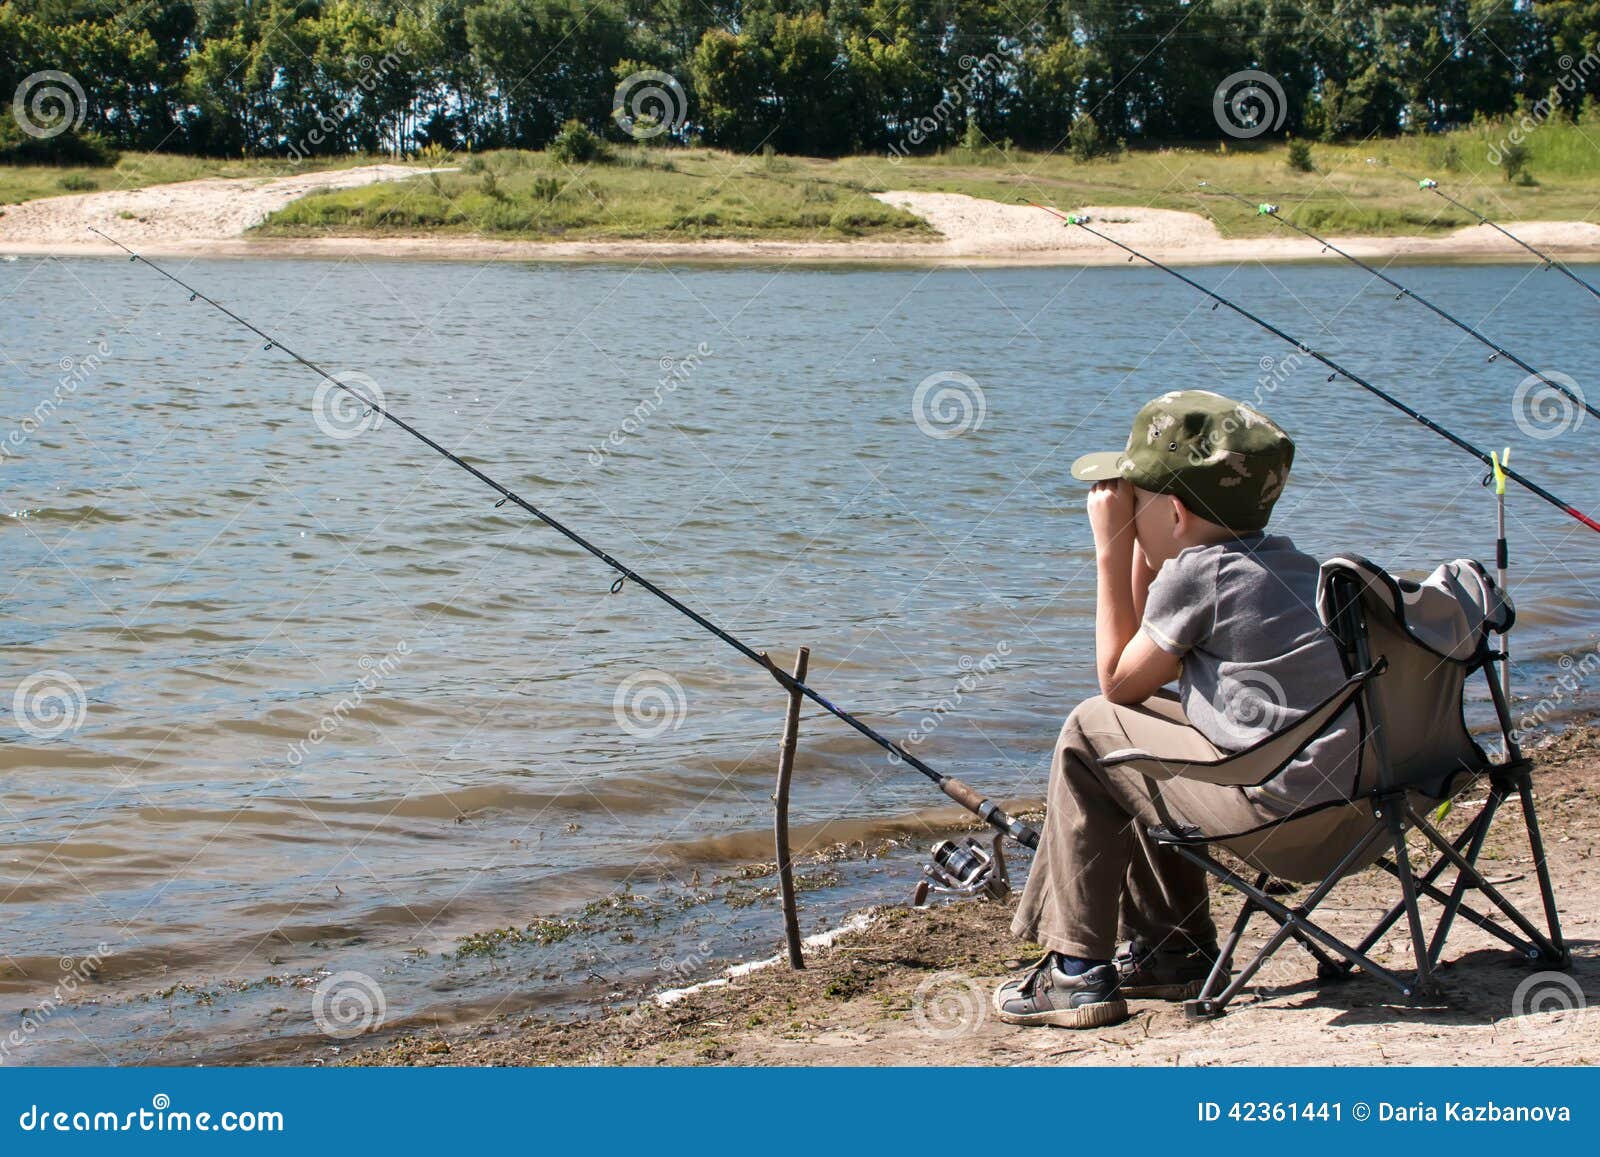 Boy with Fishing Rod Sitting on the Shore of the Pond. Stock Image